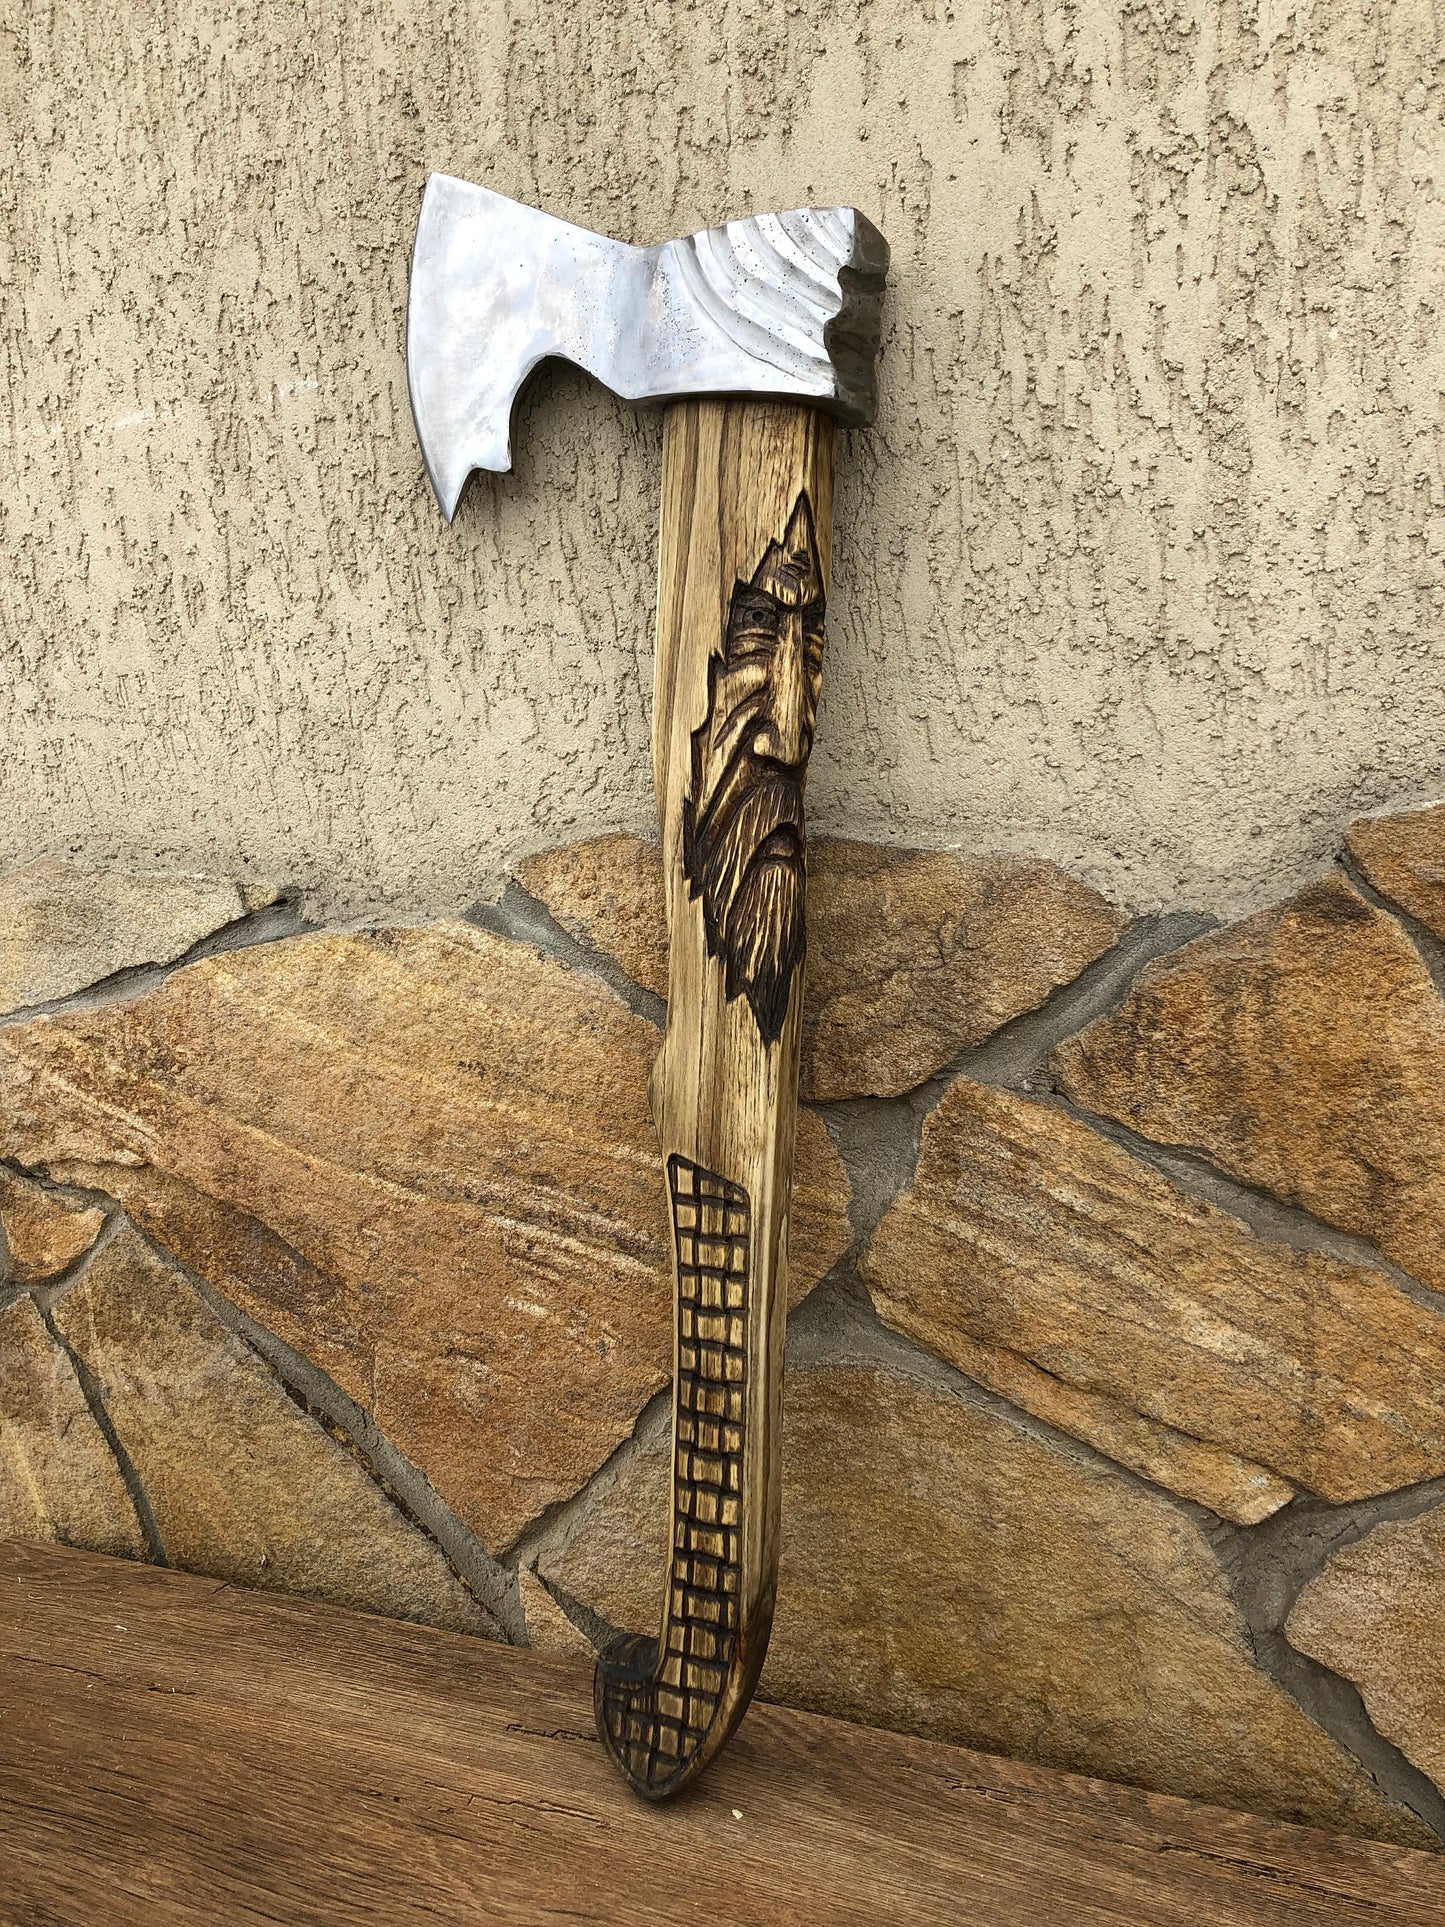 Axe, best man gift, his birthday gift, viking axe, tools, handyman tool, handyman gift, tool, gift for dad, axes, dads gift, manly gifts